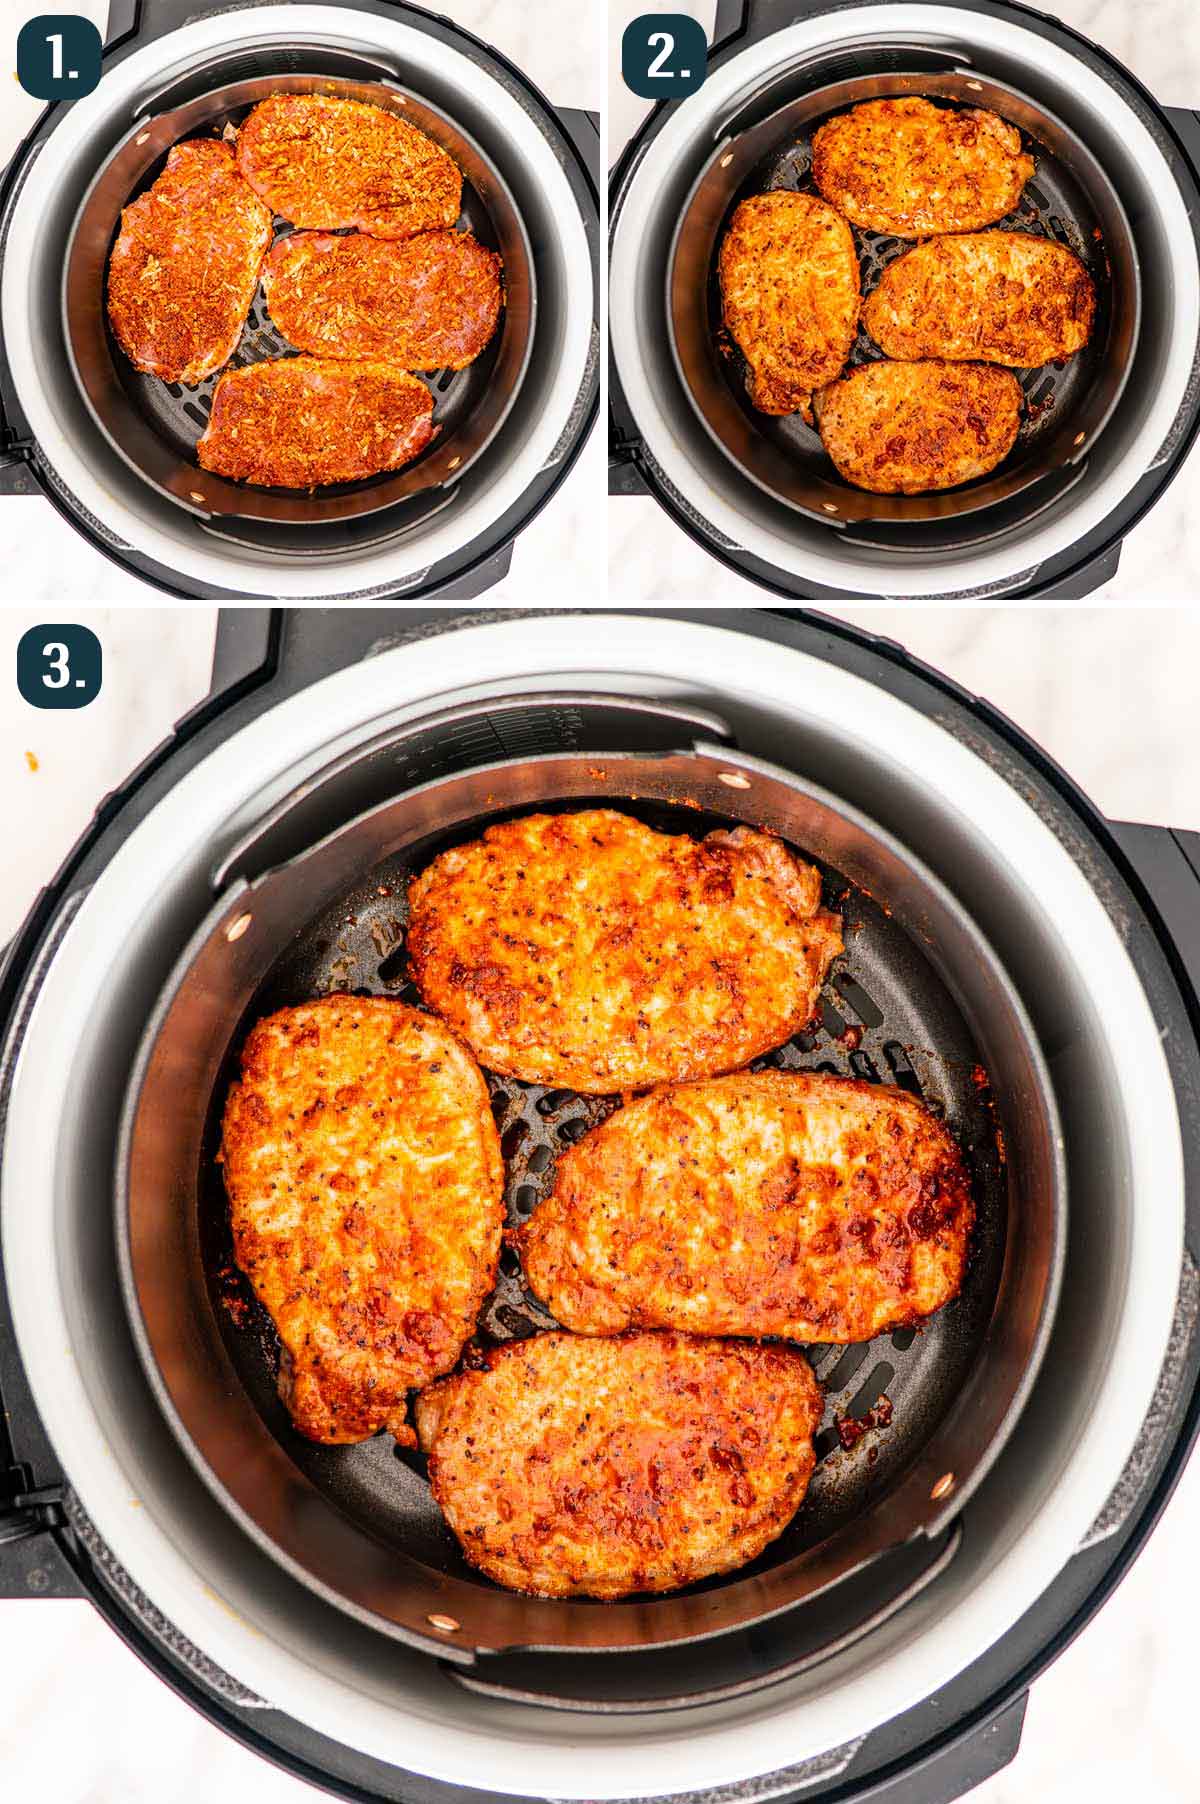 process shots showing how to air fry pork chops.